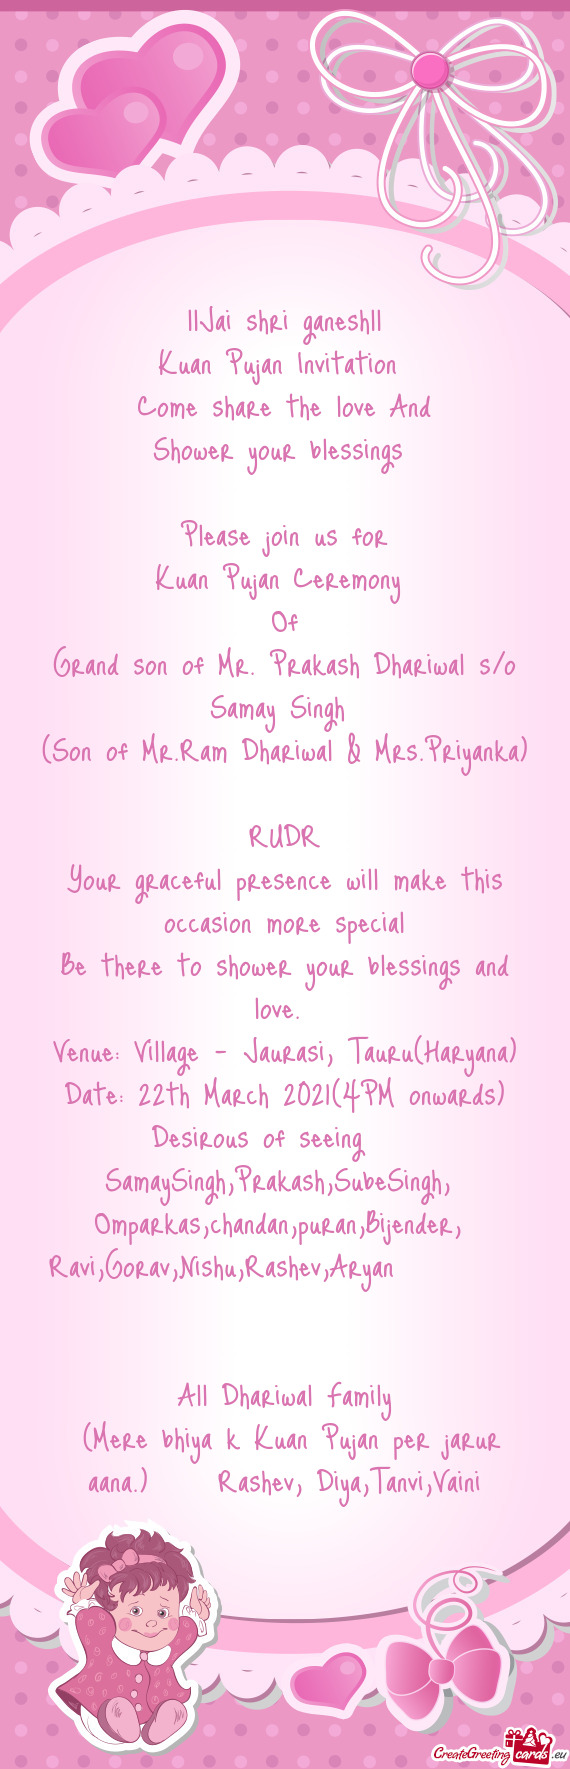 Priyanka)
 RUDR
 Your graceful presence will make this occasion more special
 Be there to shower you